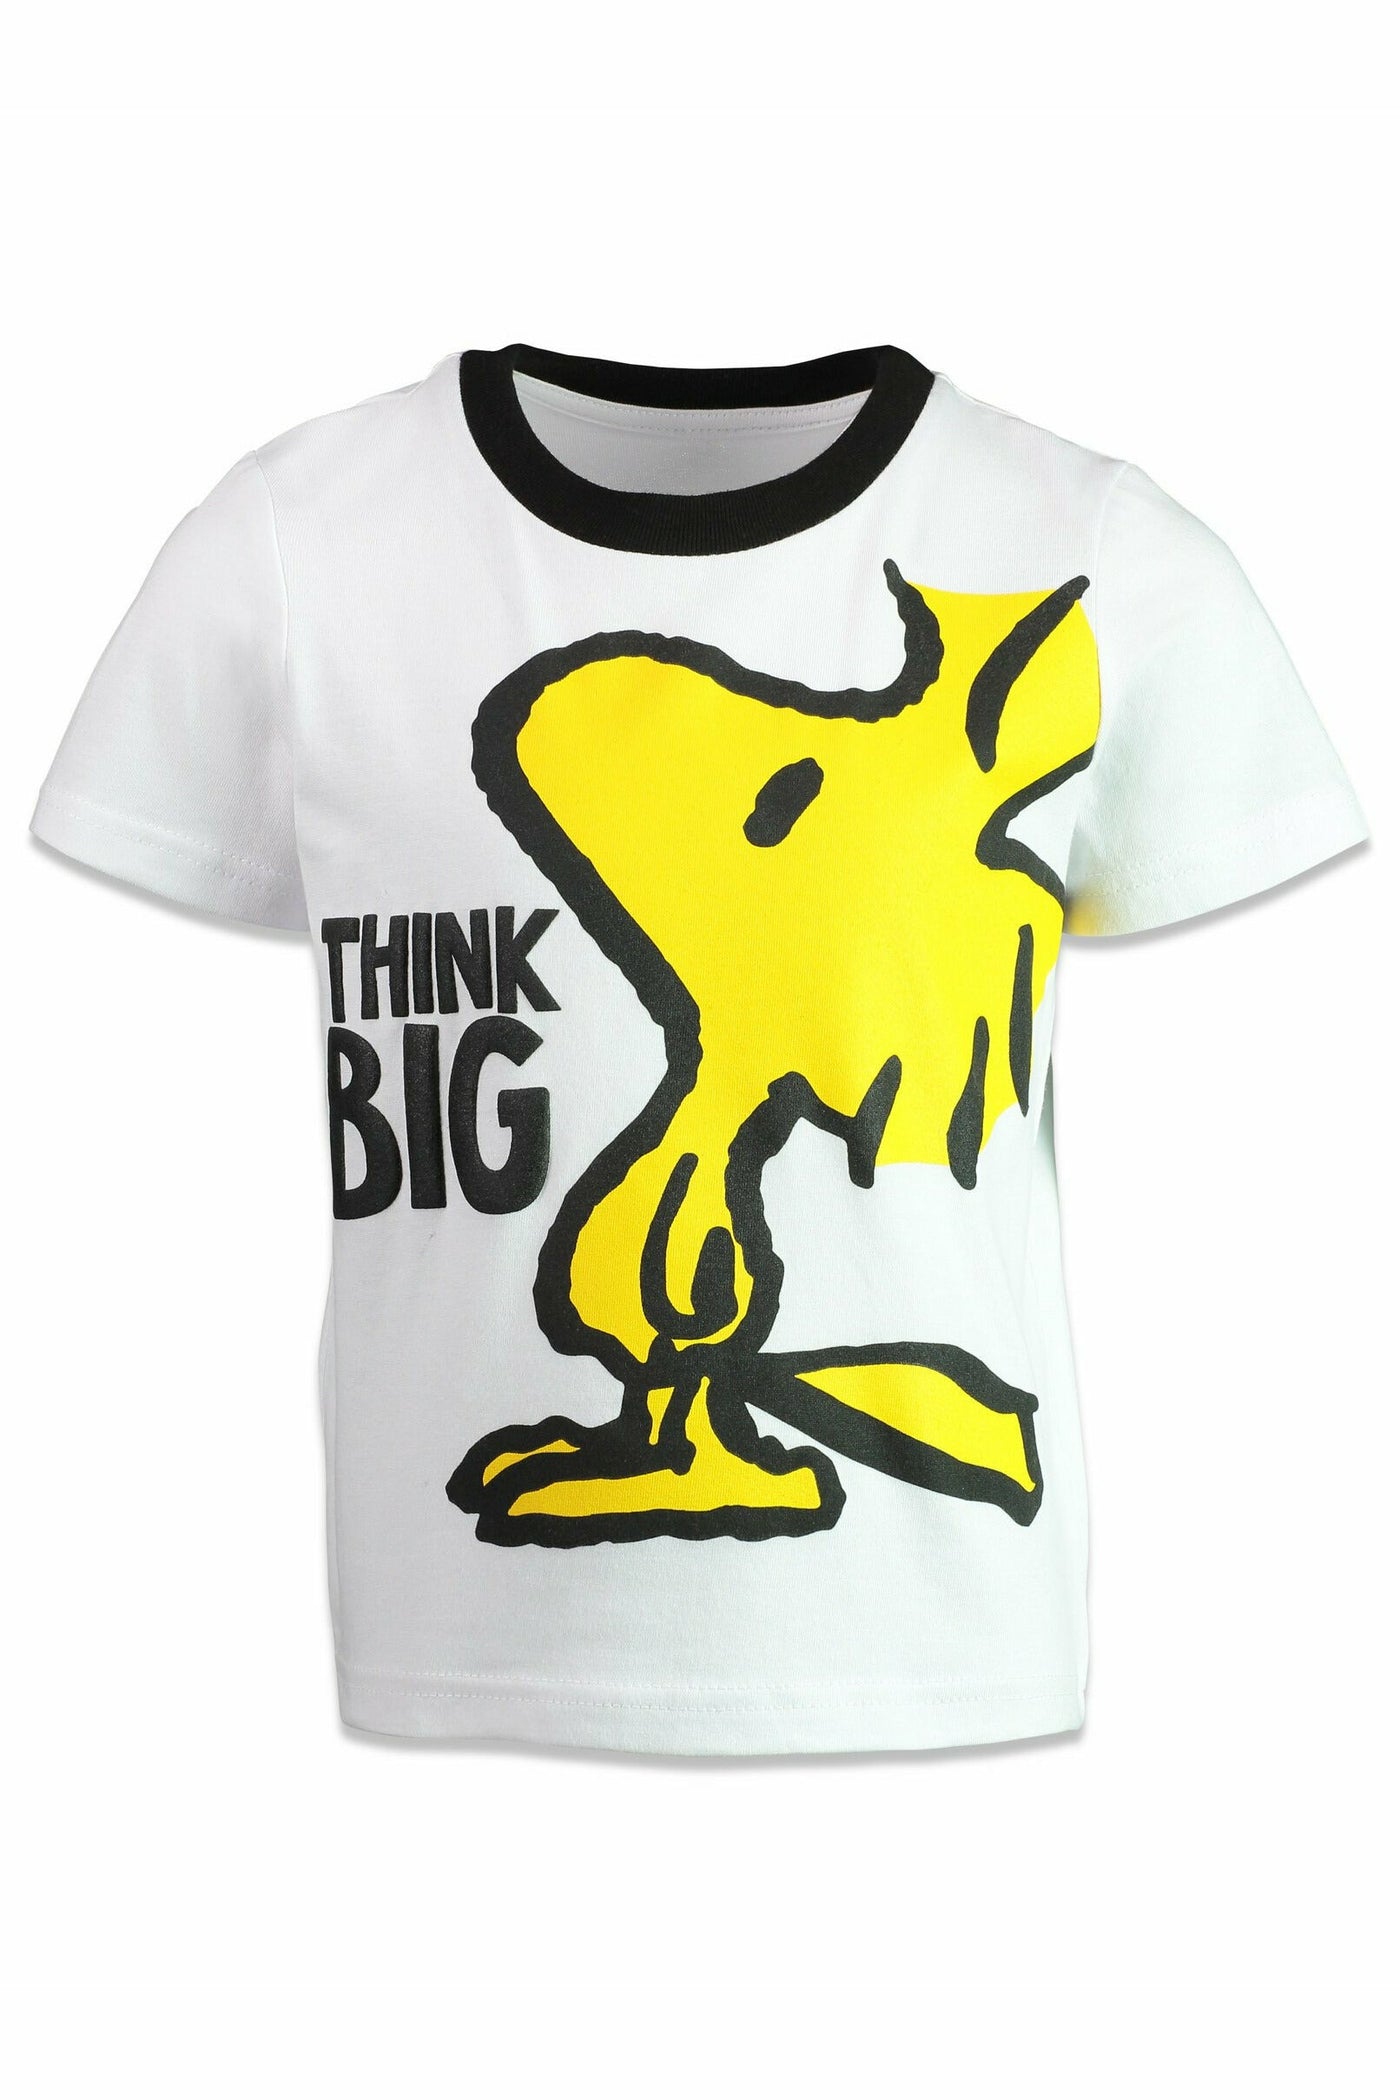 Peanuts Snoopy 4 Pack Graphic T-Shirt